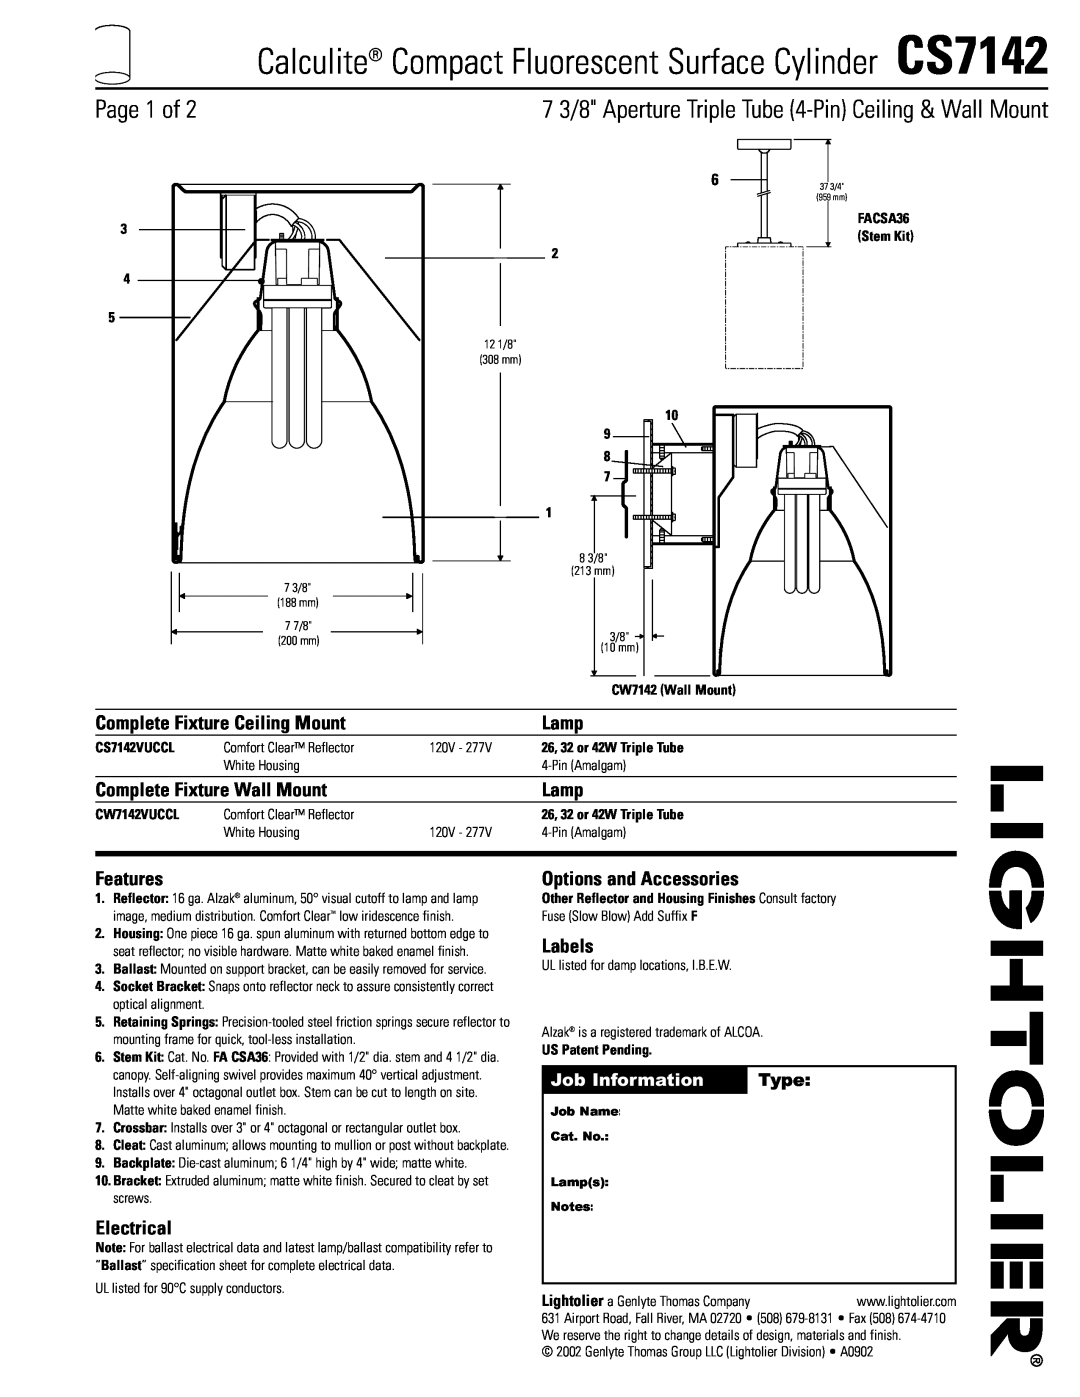 Lightolier CS7142 specifications Page 1 of, Job Information, Type, Complete Fixture Ceiling Mount, Lamp, Features, Labels 